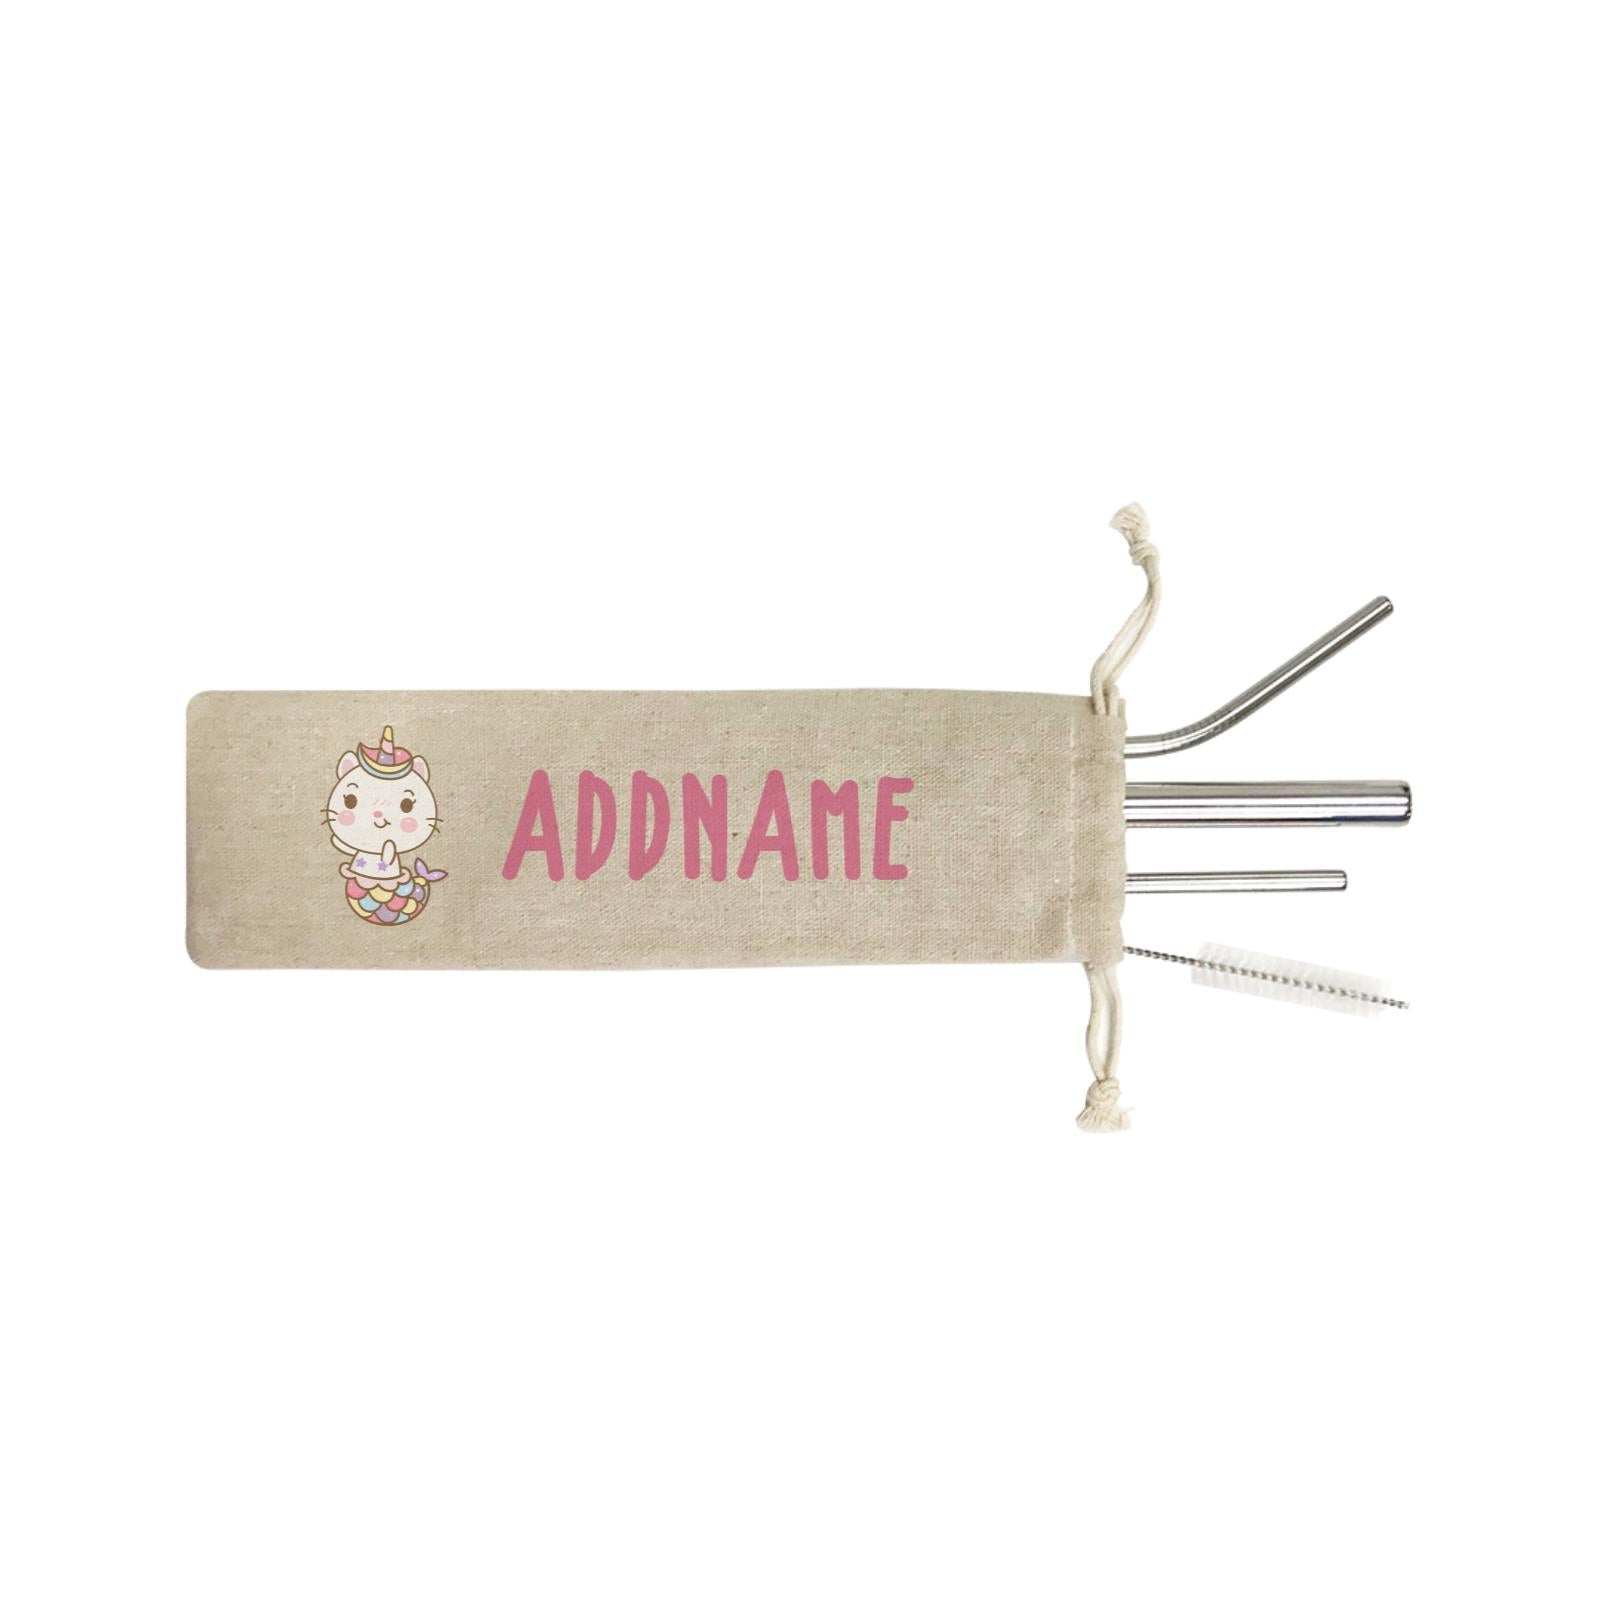 Unicorn And Princess Series Cute Cat Mermaid Addname SB 4-In-1 Stainless Steel Straw Set in Satchel